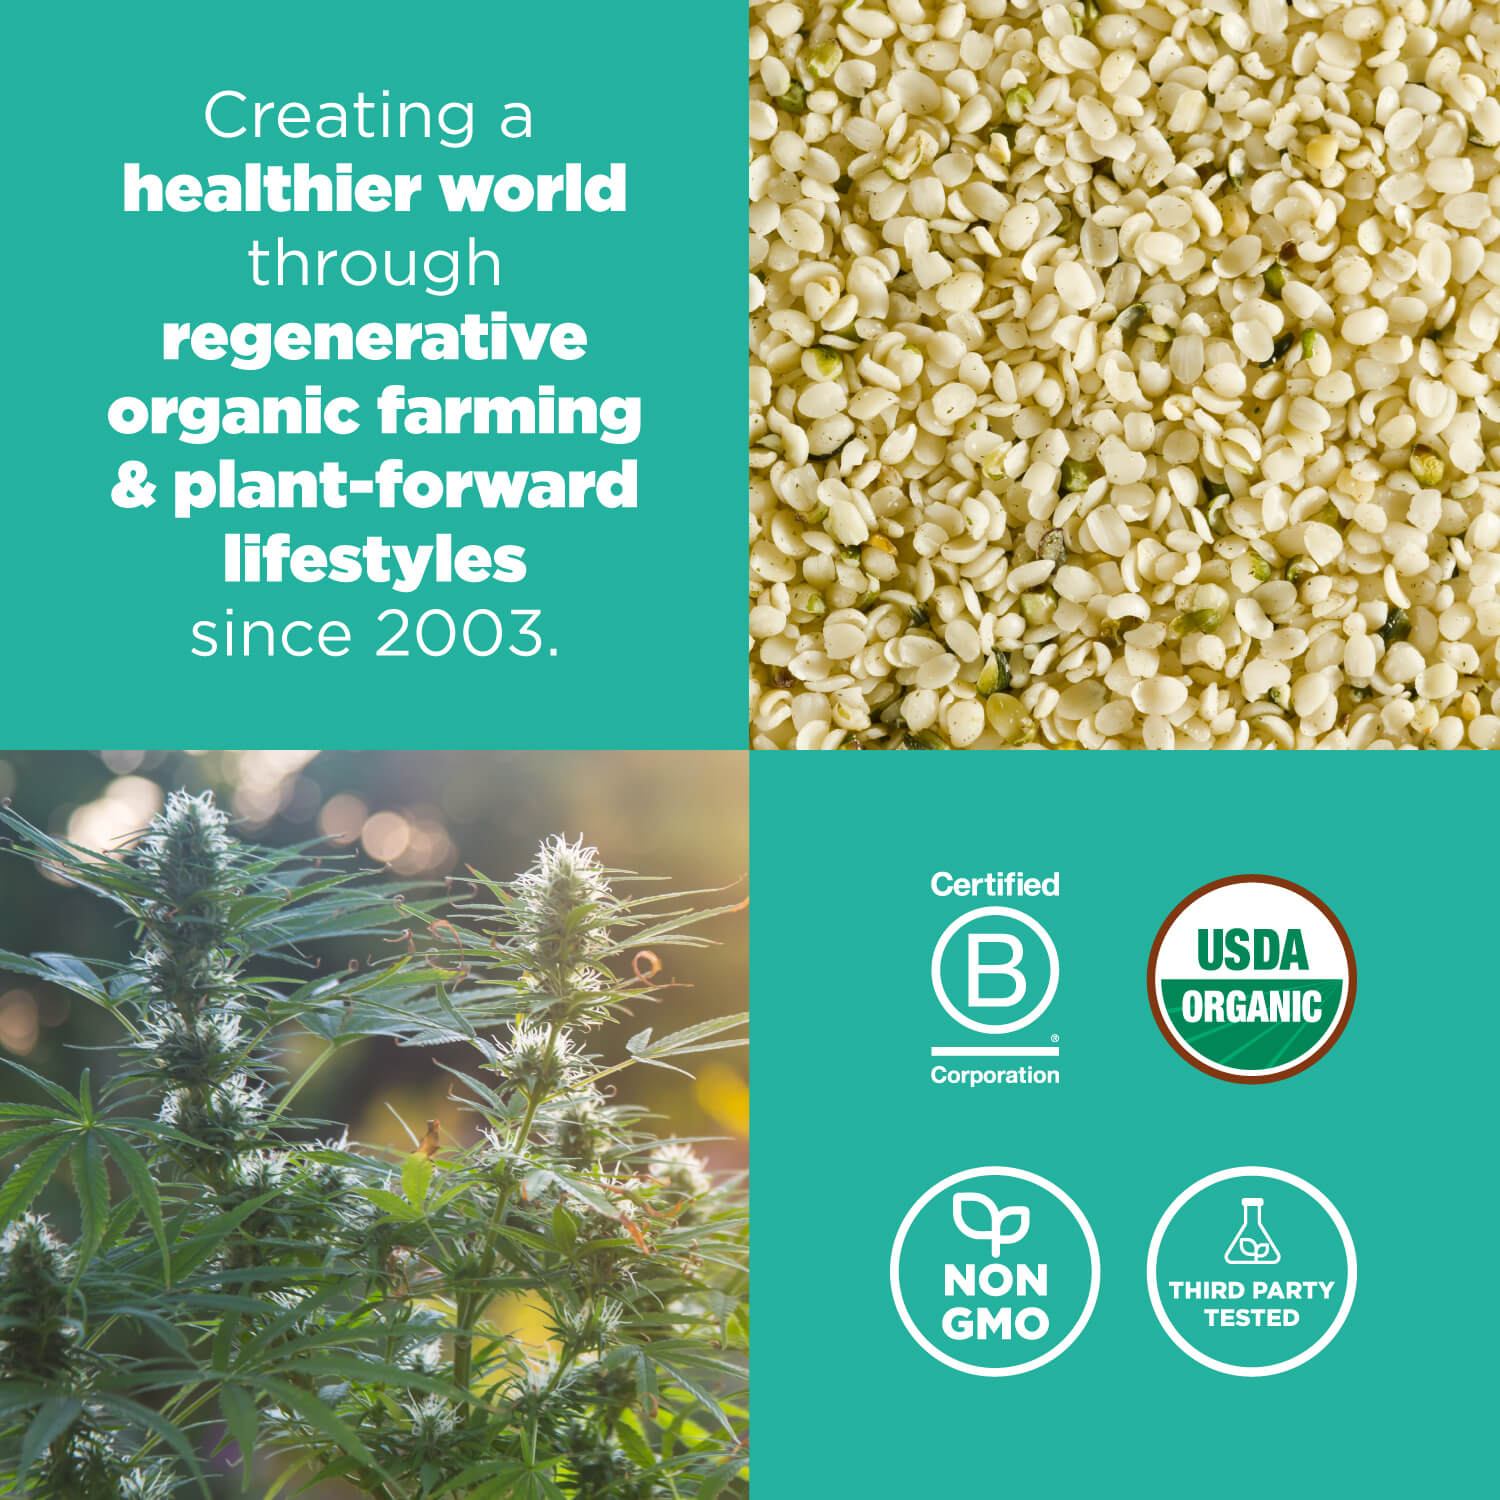 Navitas Organics is committed to creating a healthier world through regenerative organic farming and plant-forward lifestyles since 2003.